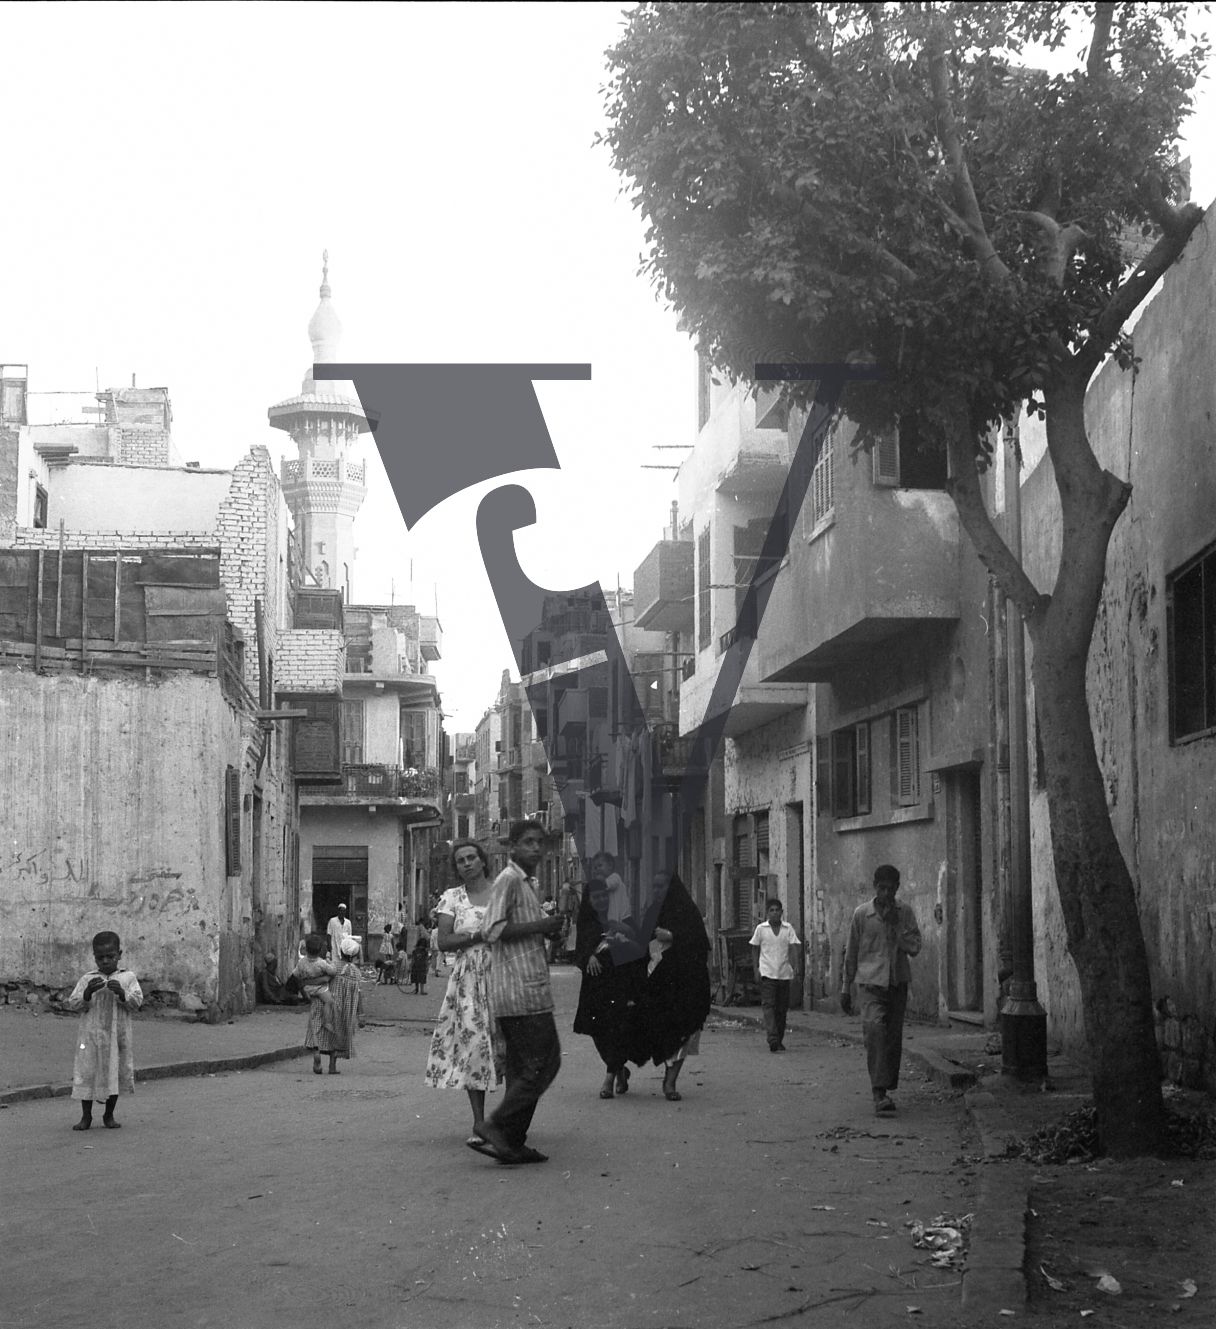 Harrania, Egypt, streetview of buildings and people.